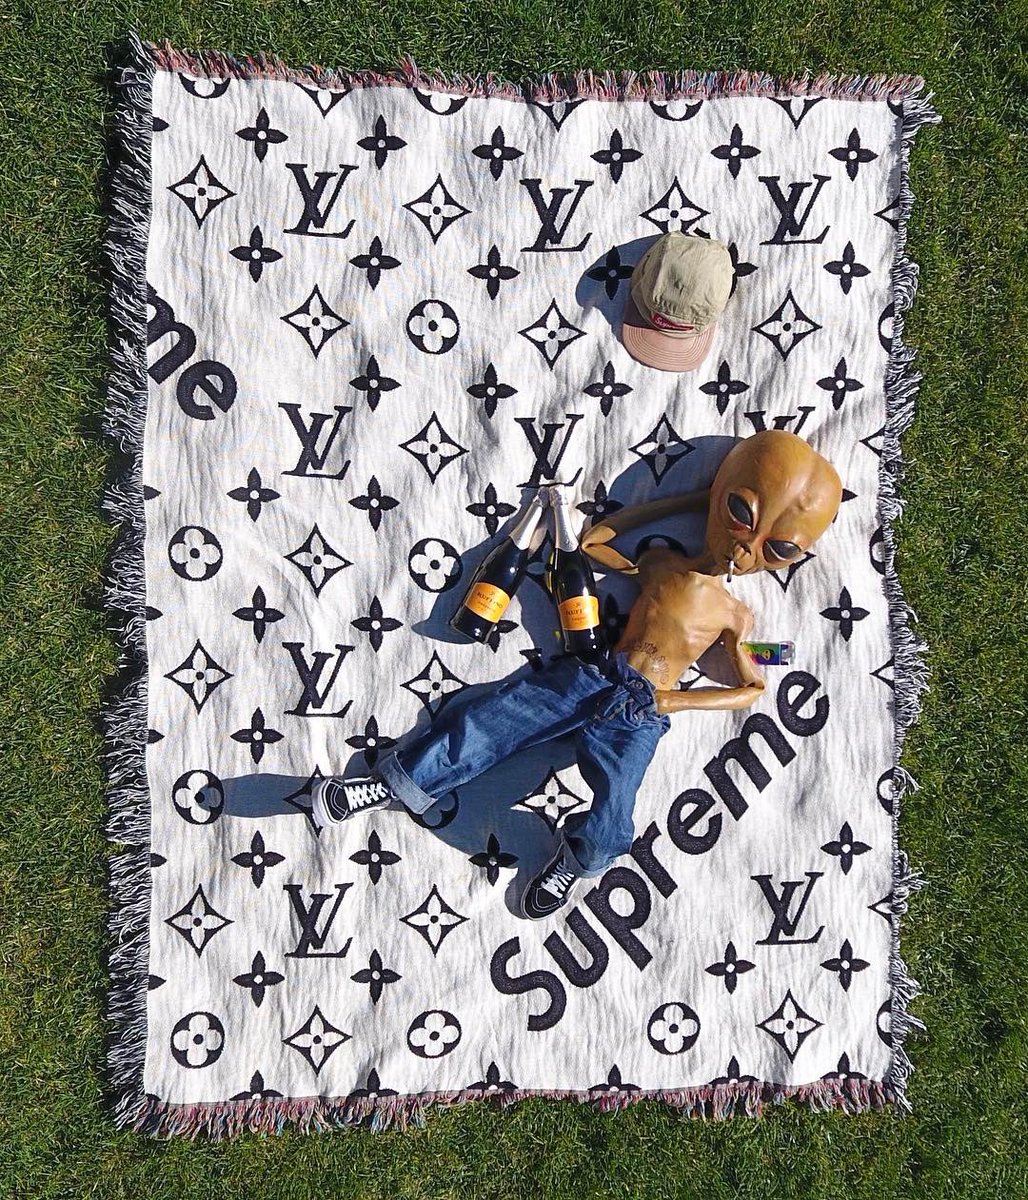 HYPEBEAST On Twitter LILMAYO With The Supreme X LouisVuitton Blanket Early